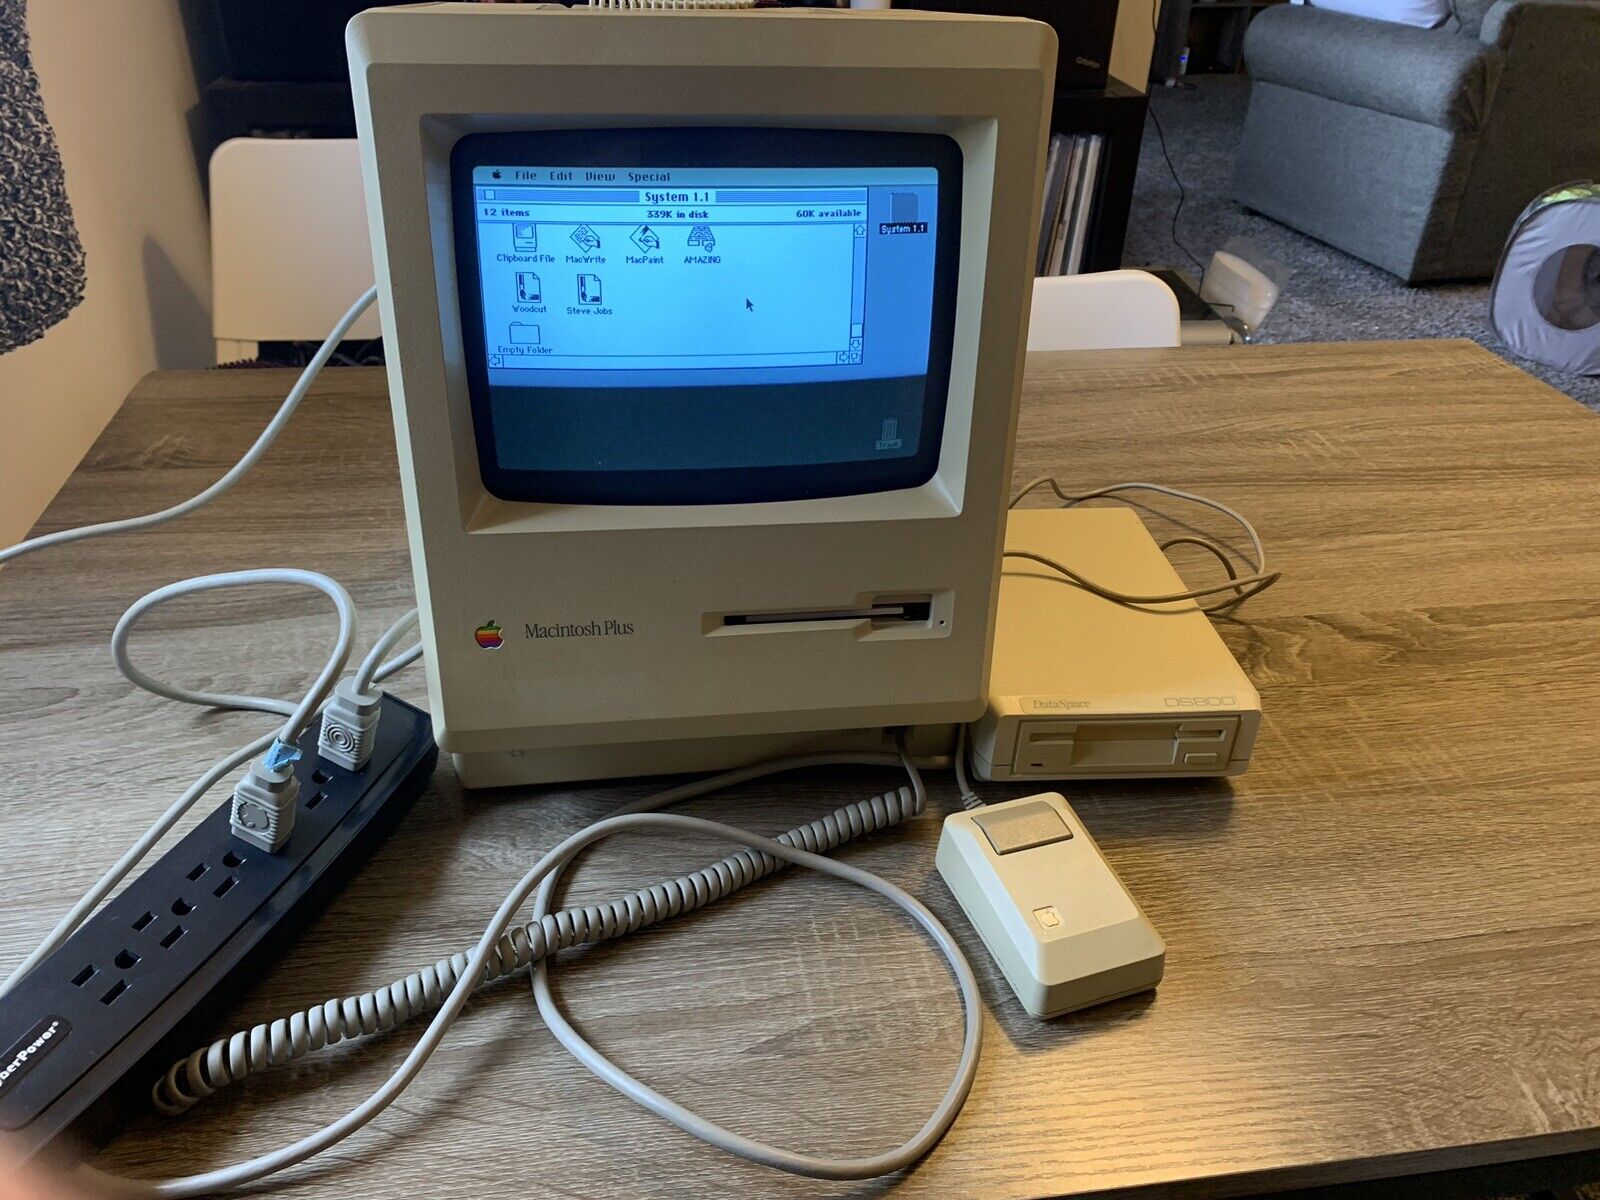 Macintosh Plus 1MD M0001A w/ System 1.1 Boot Disk DataSpace DS800, Apple Mouse